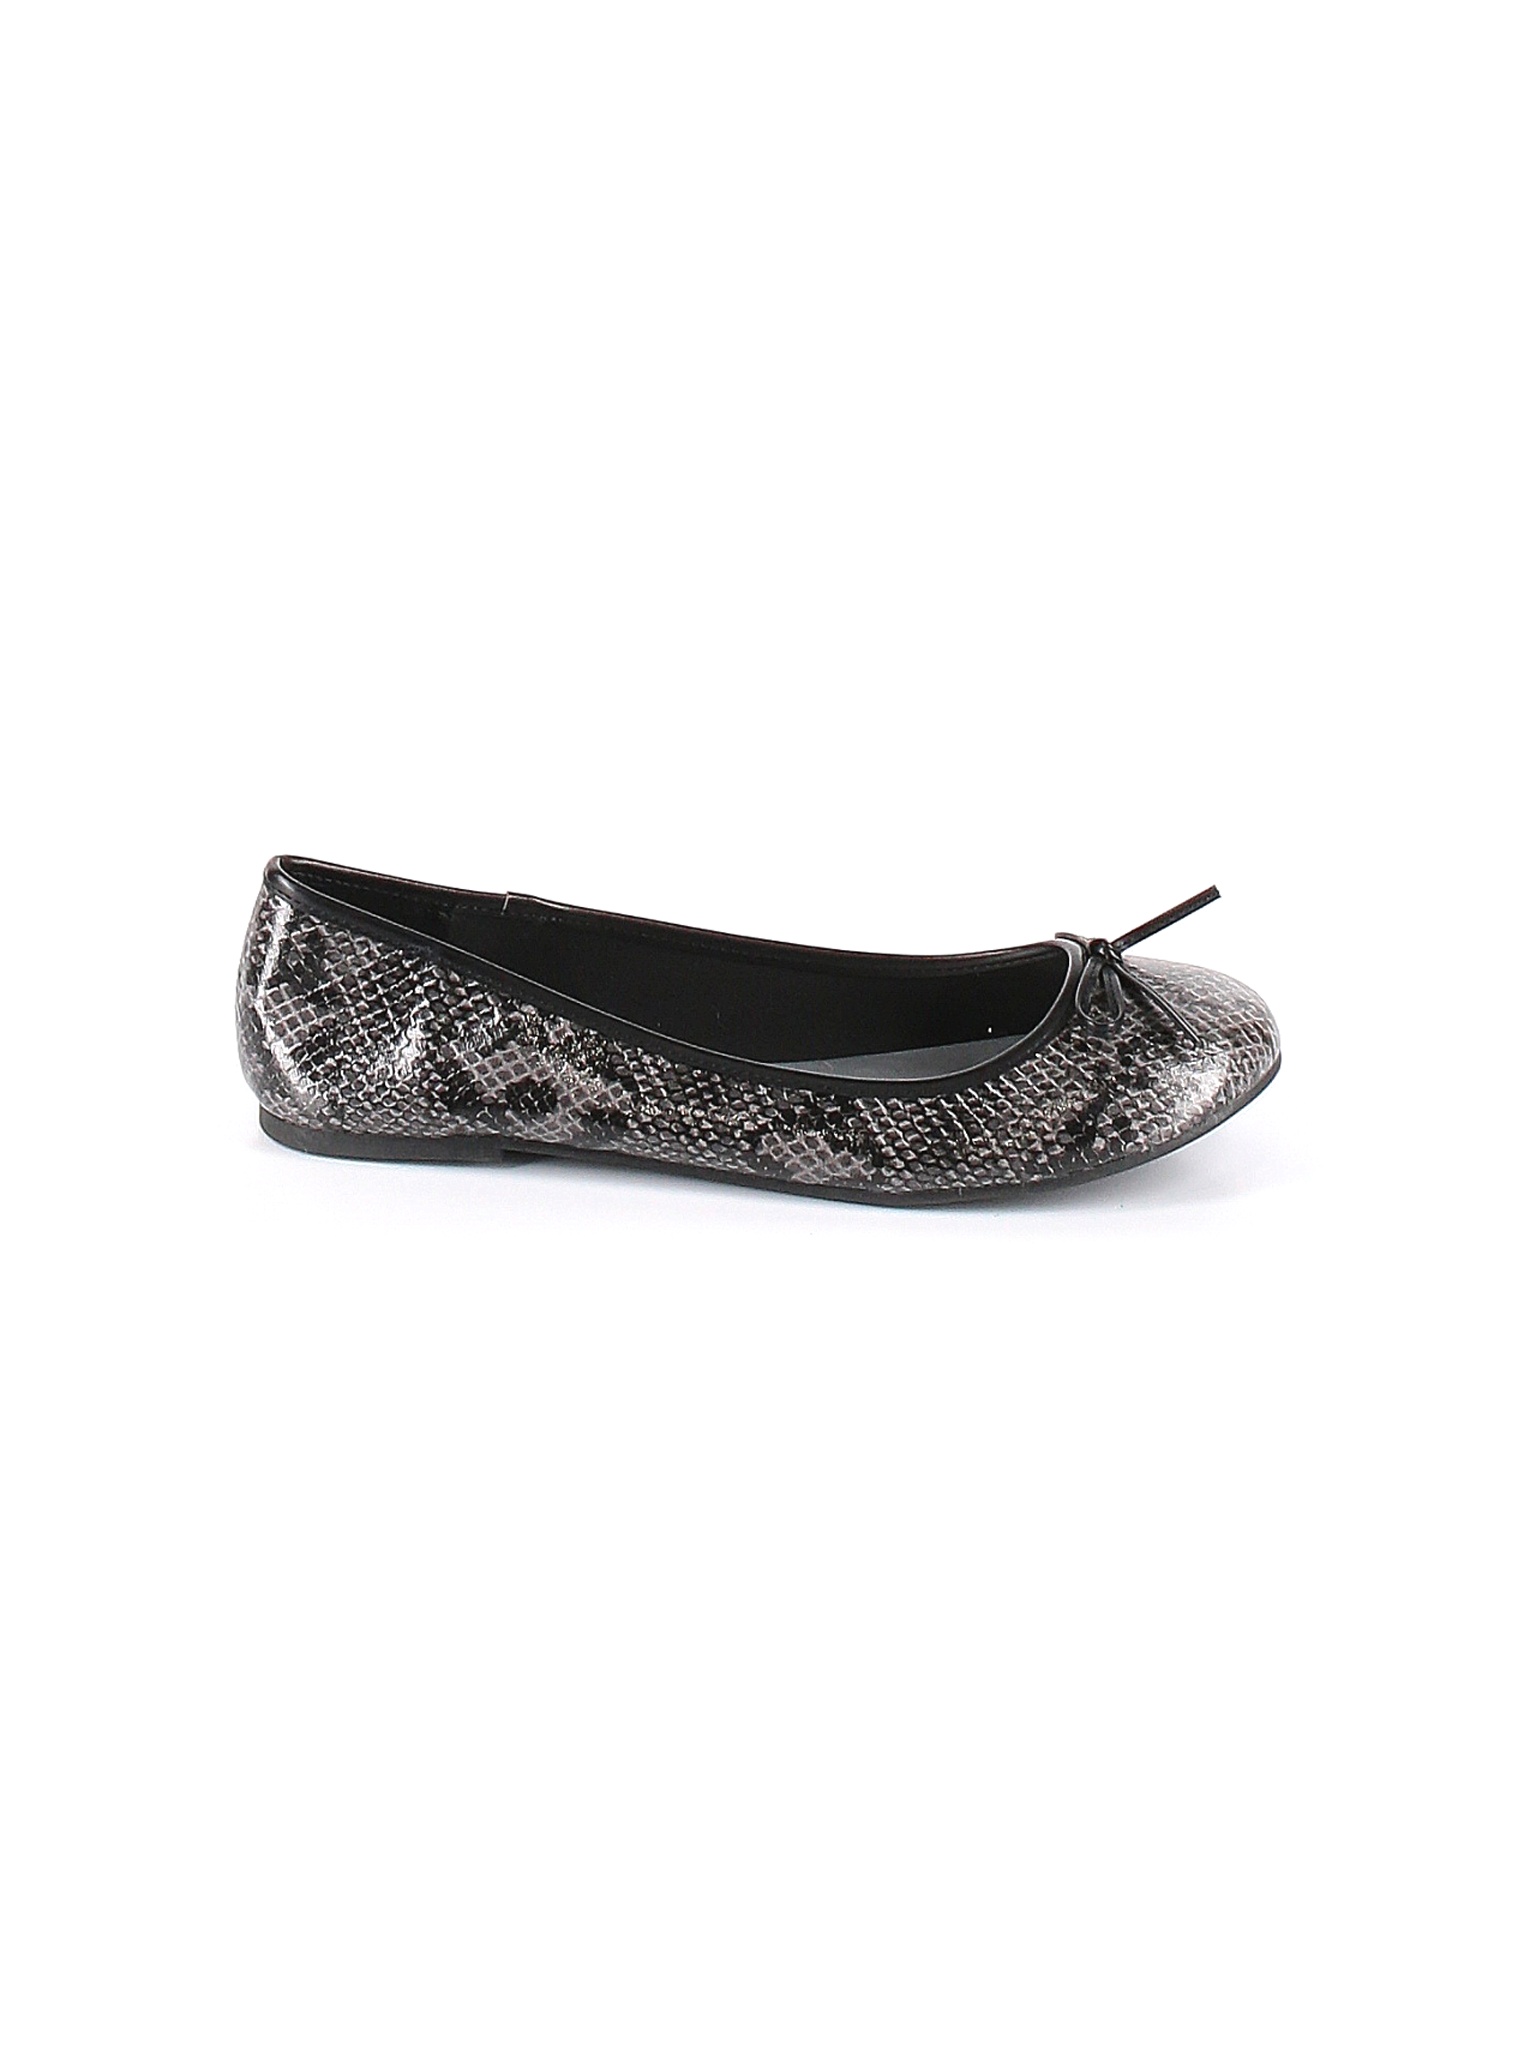 American Eagle Outfitters Women Black Flats US 8 | eBay